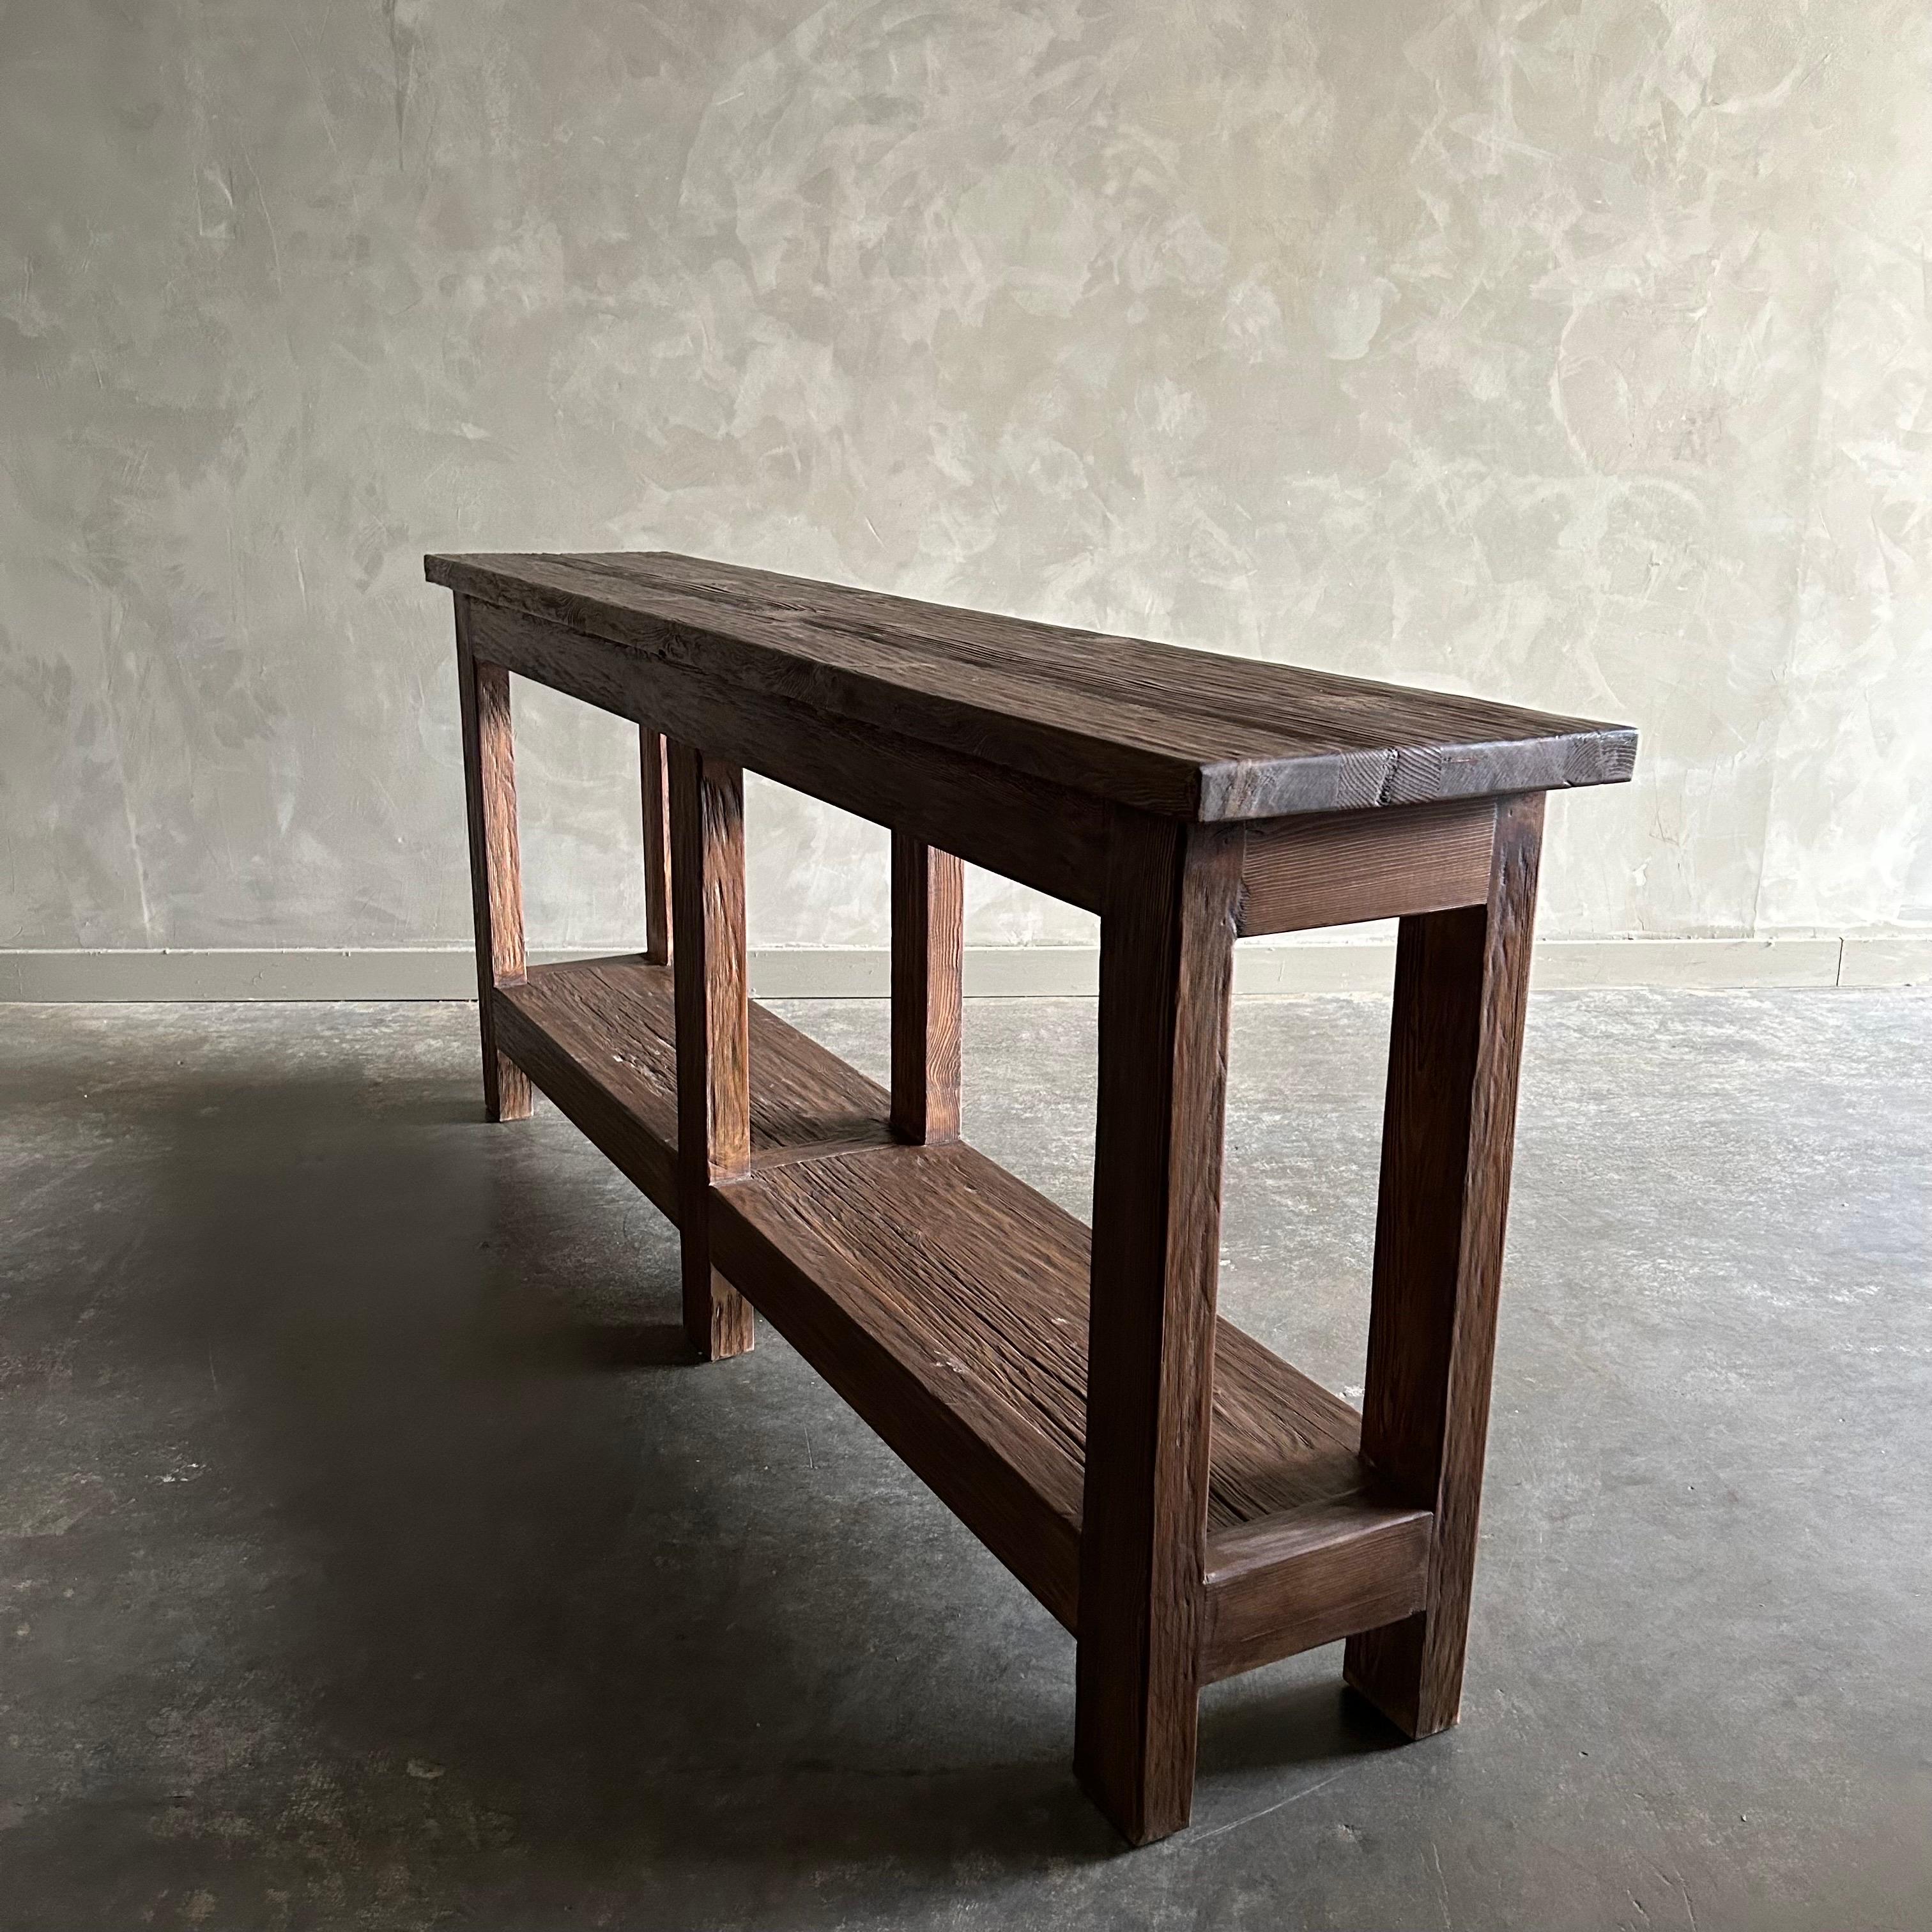 Contemporary Custom Reclaimed Elm Wood Console Table In Dark Finish with Shelf For Sale